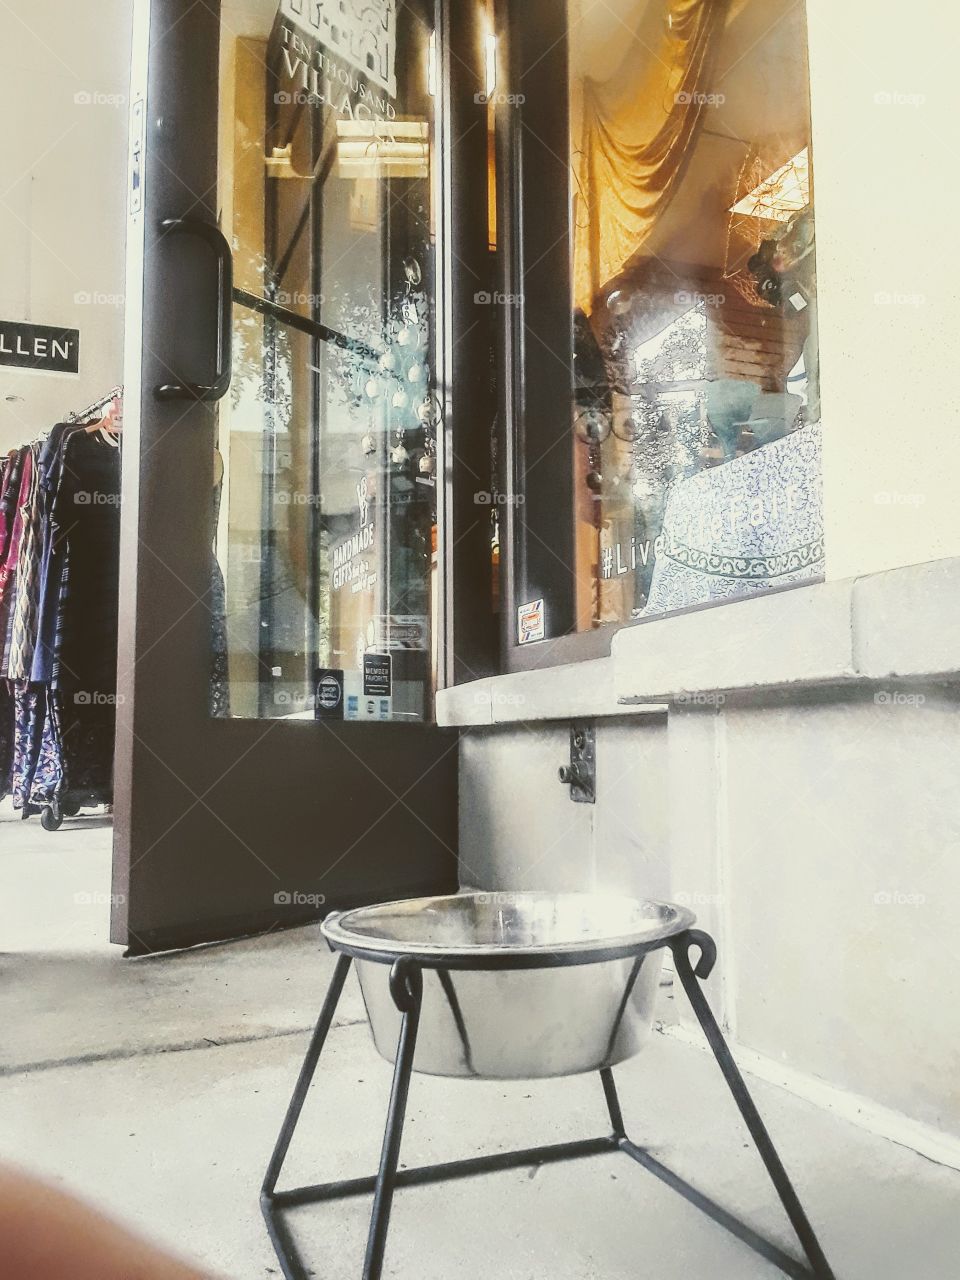 water bowl placed next to boutique